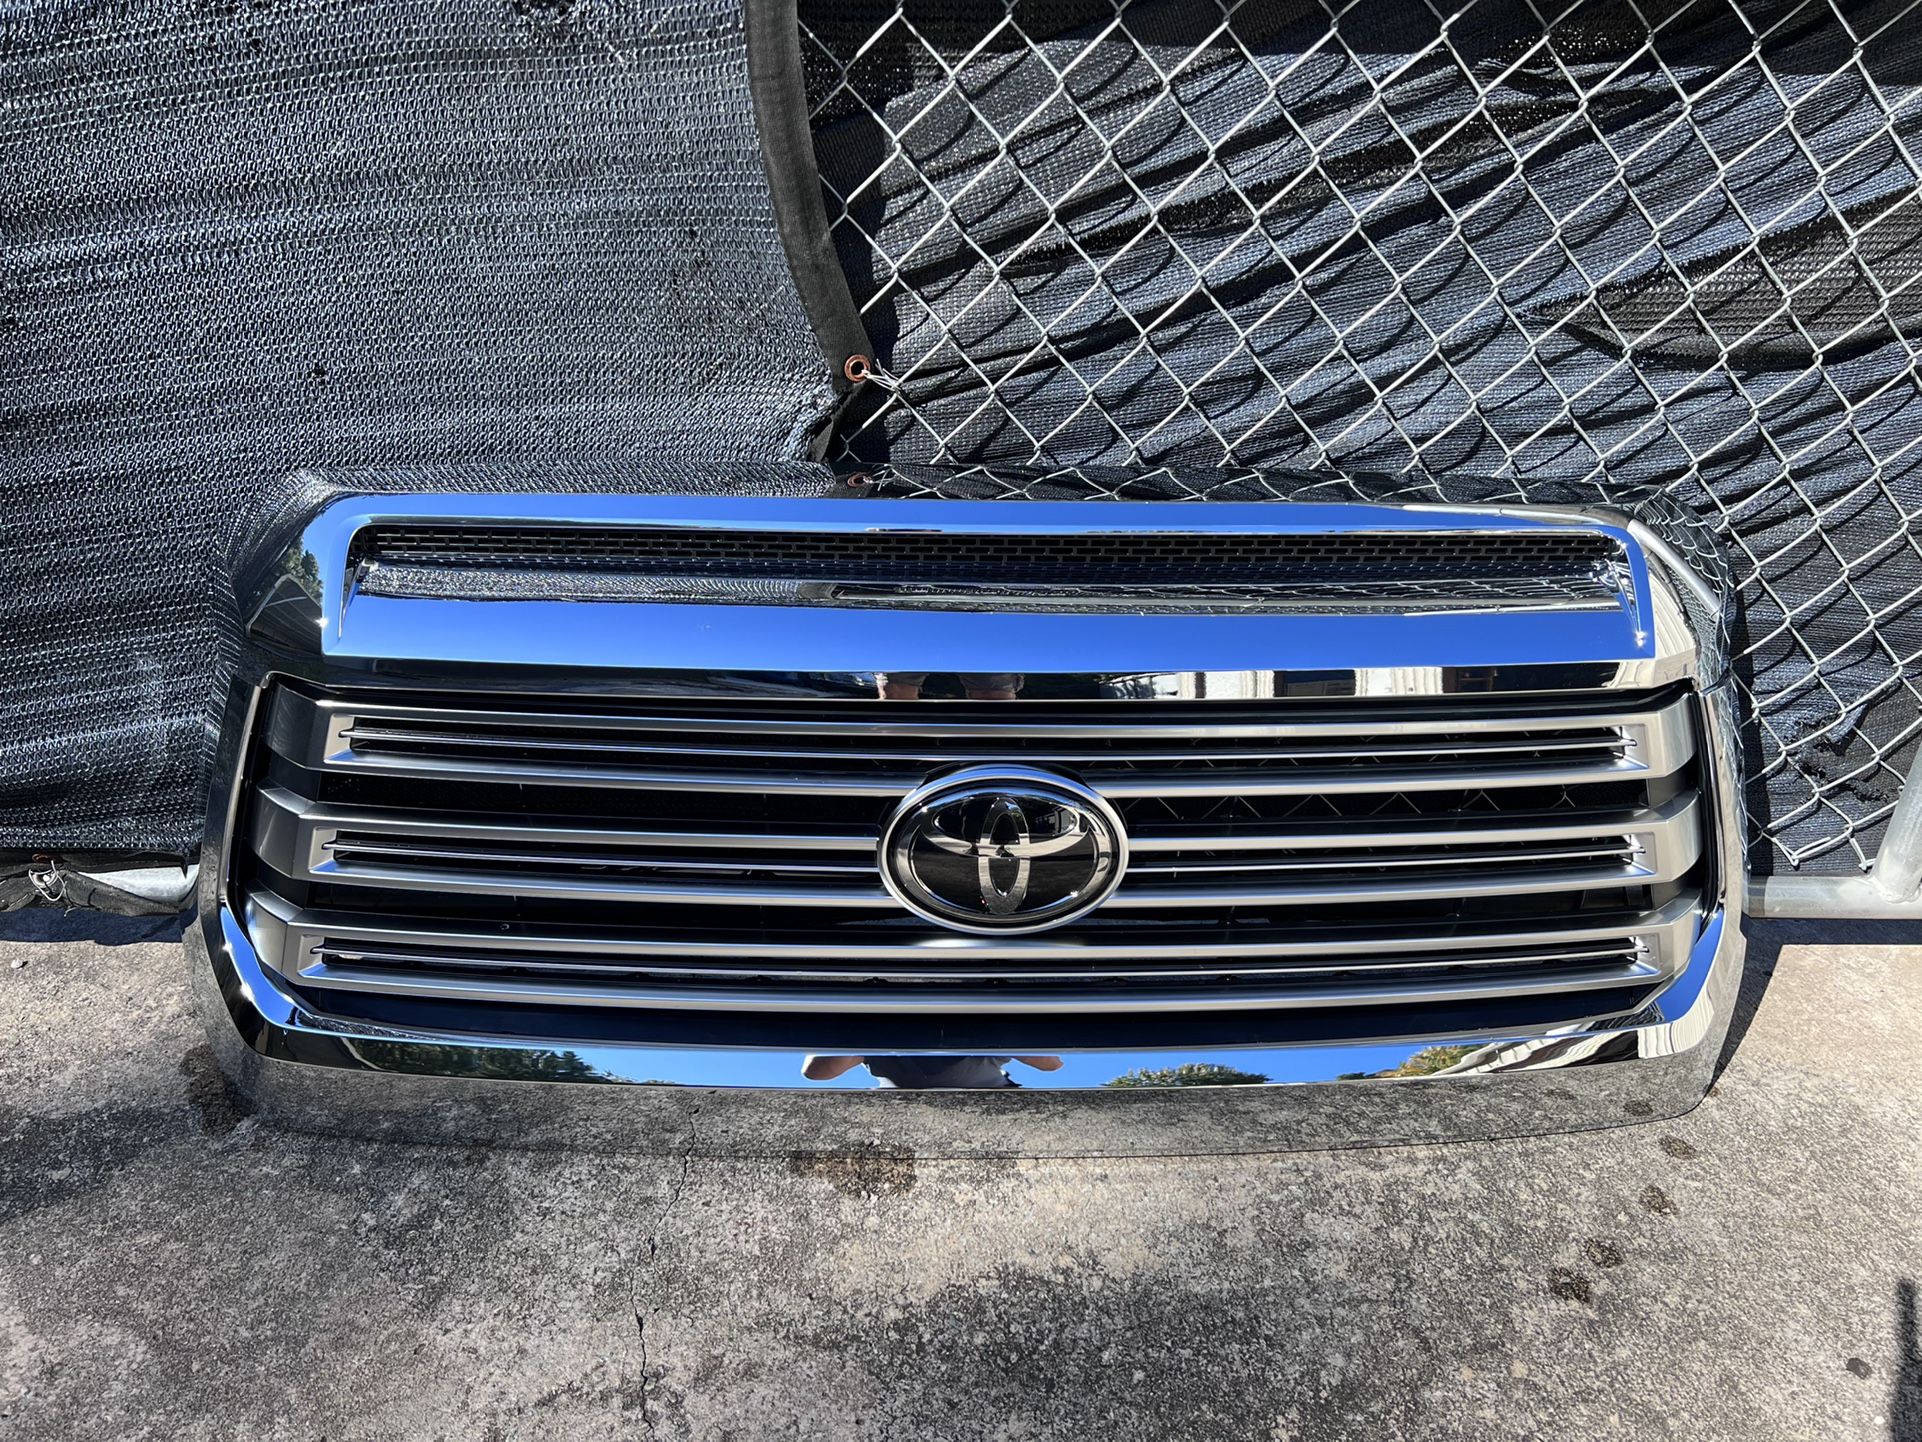 Toyota Tundra Grille Grill Platinum Hood Molding New Take Off 2014-21